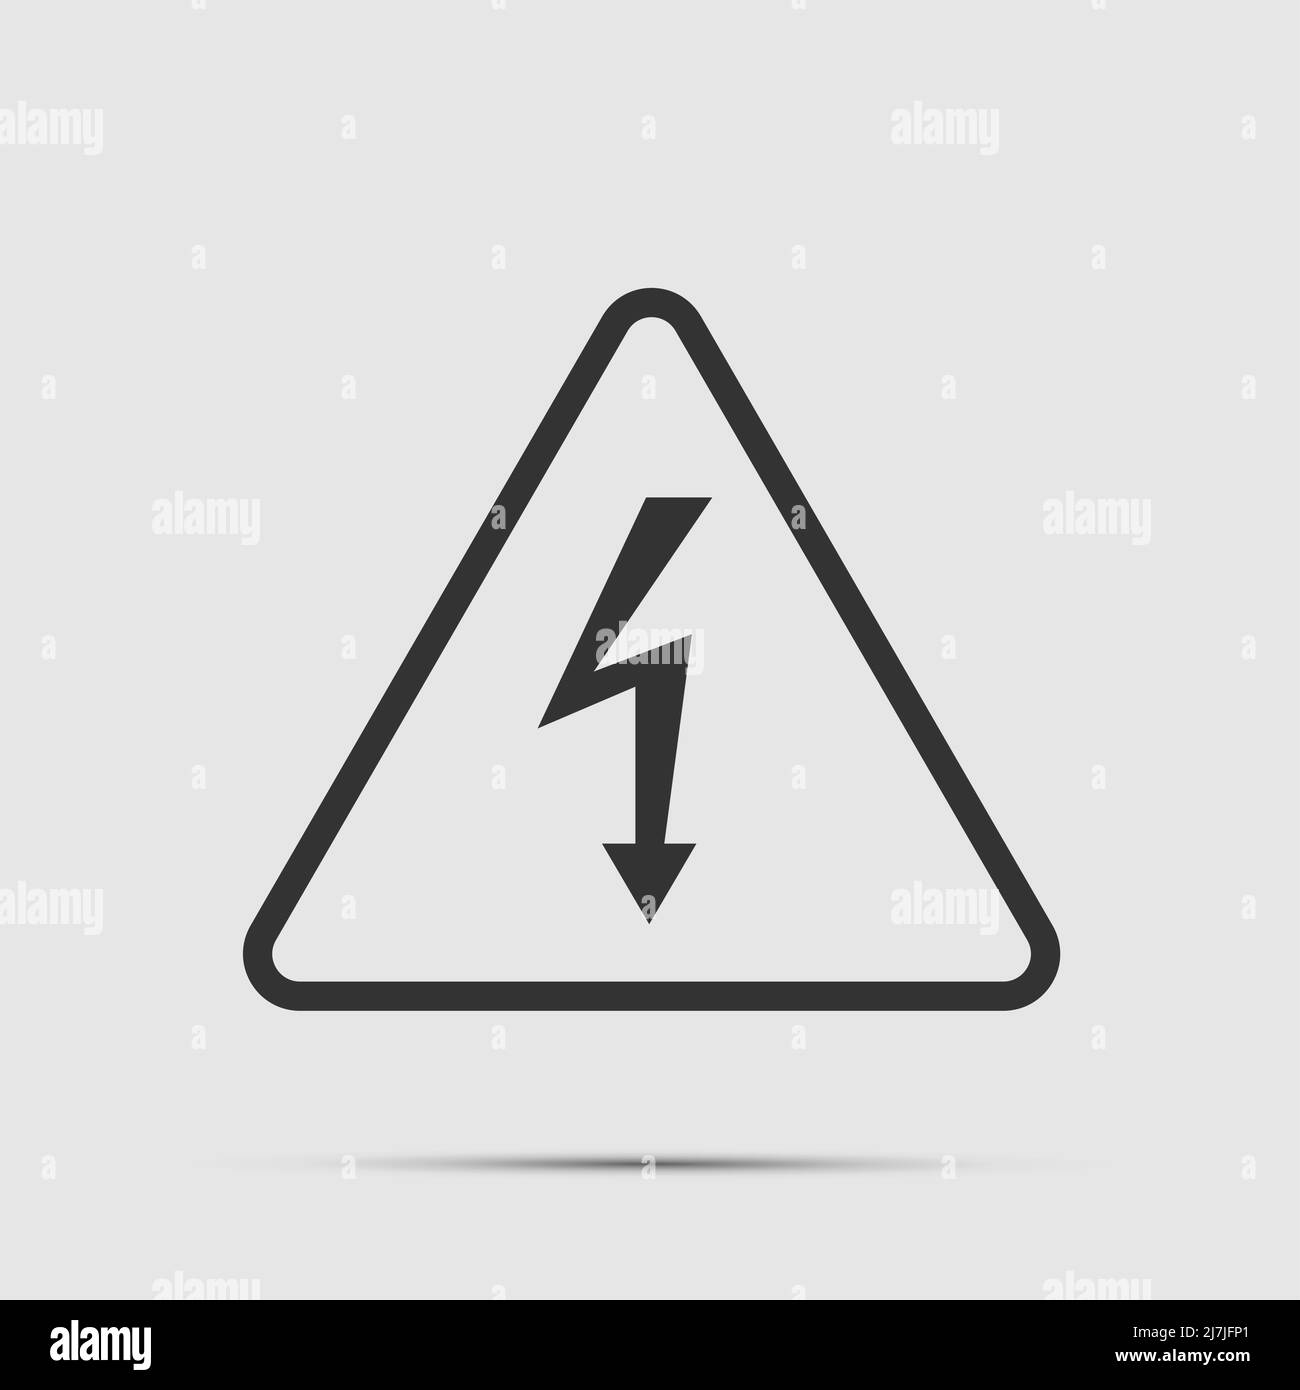 High Voltage Sign.Black icon  on white background.vector illustration Stock Vector